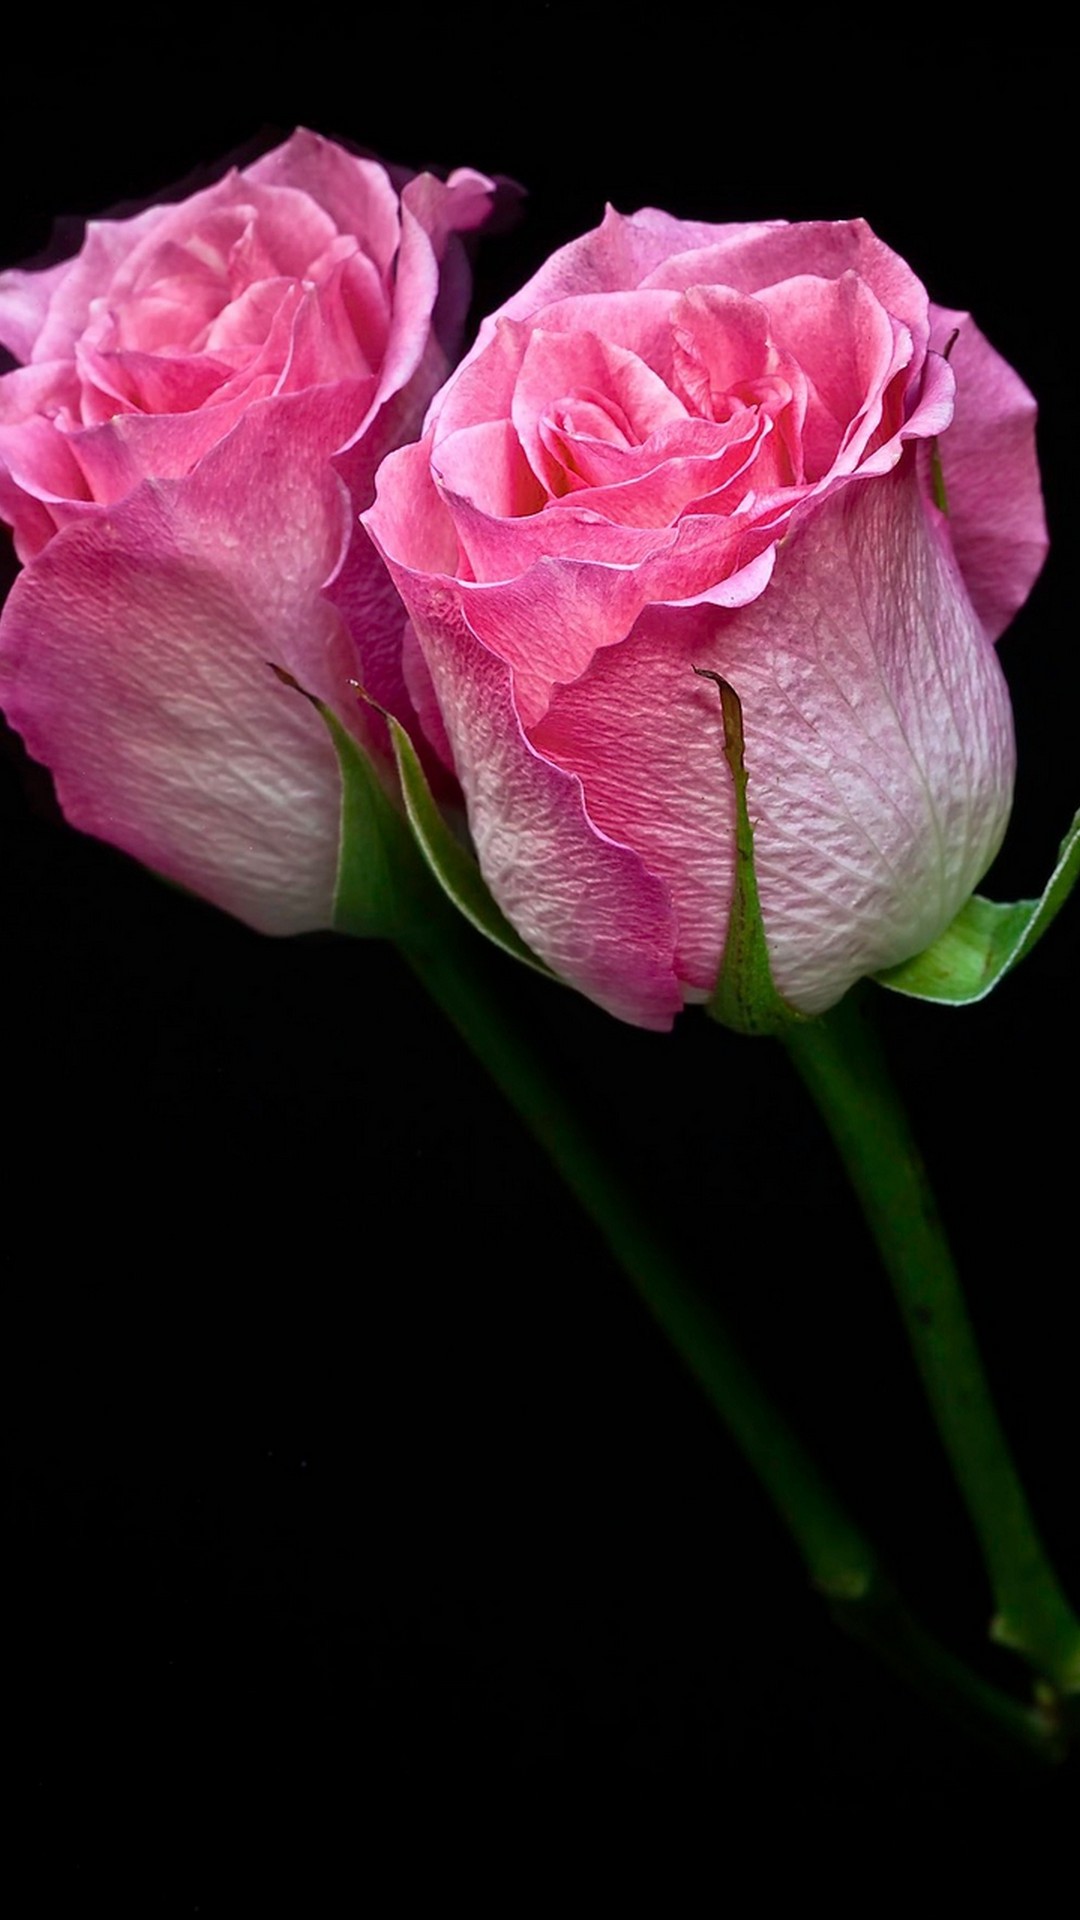 Pink Flower Wallpaper For Mobile Android Resolution 1080x1920